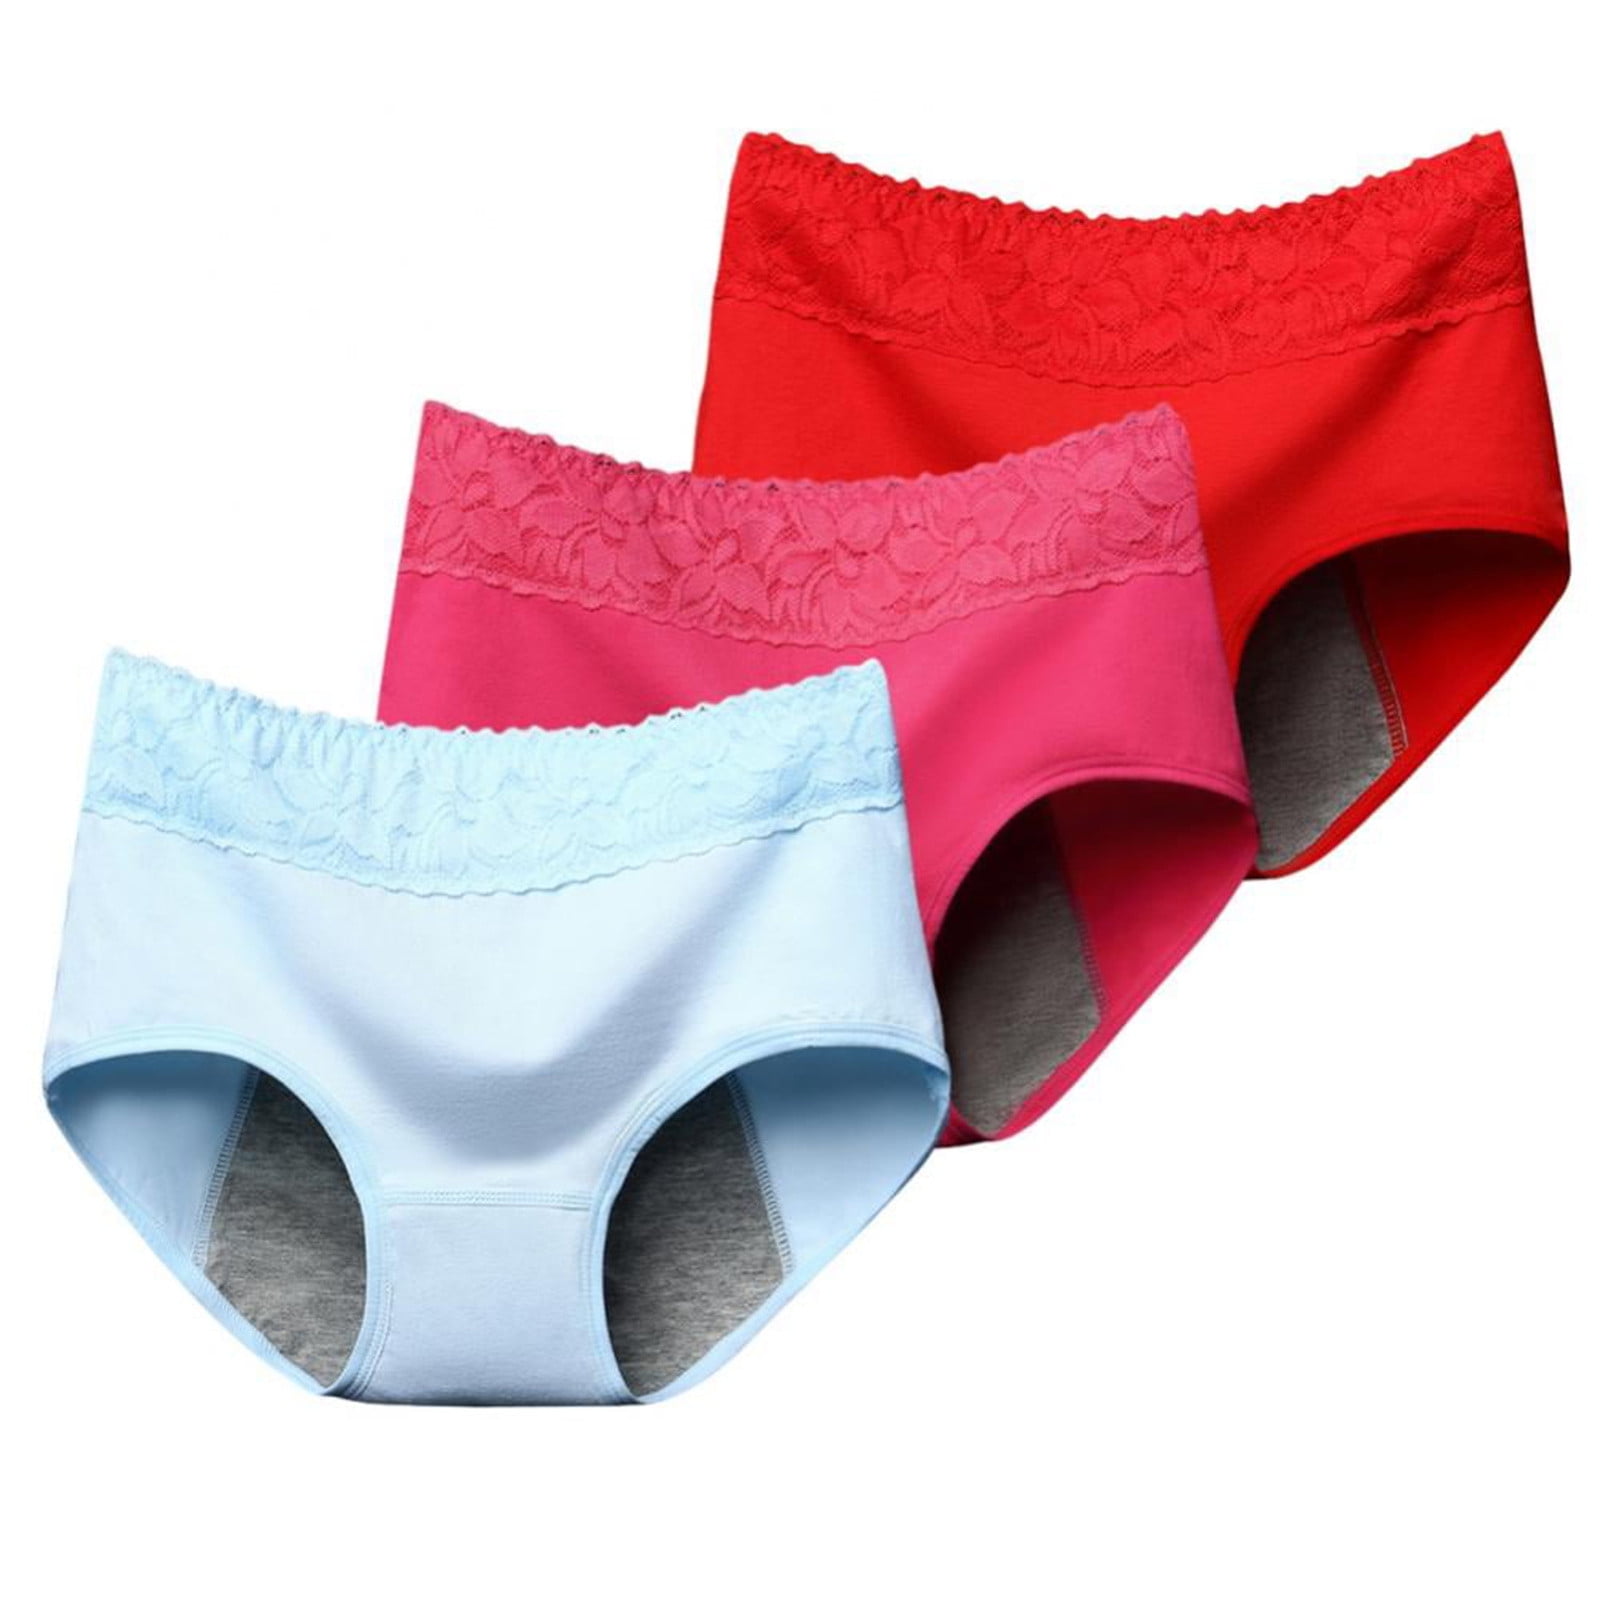 Zivira Women's Outer Elastic No Rash Panties Pack of 3 - Soft, Breathable,  Comfortable, and Anti-Microbial Underwear for Everyday Wear